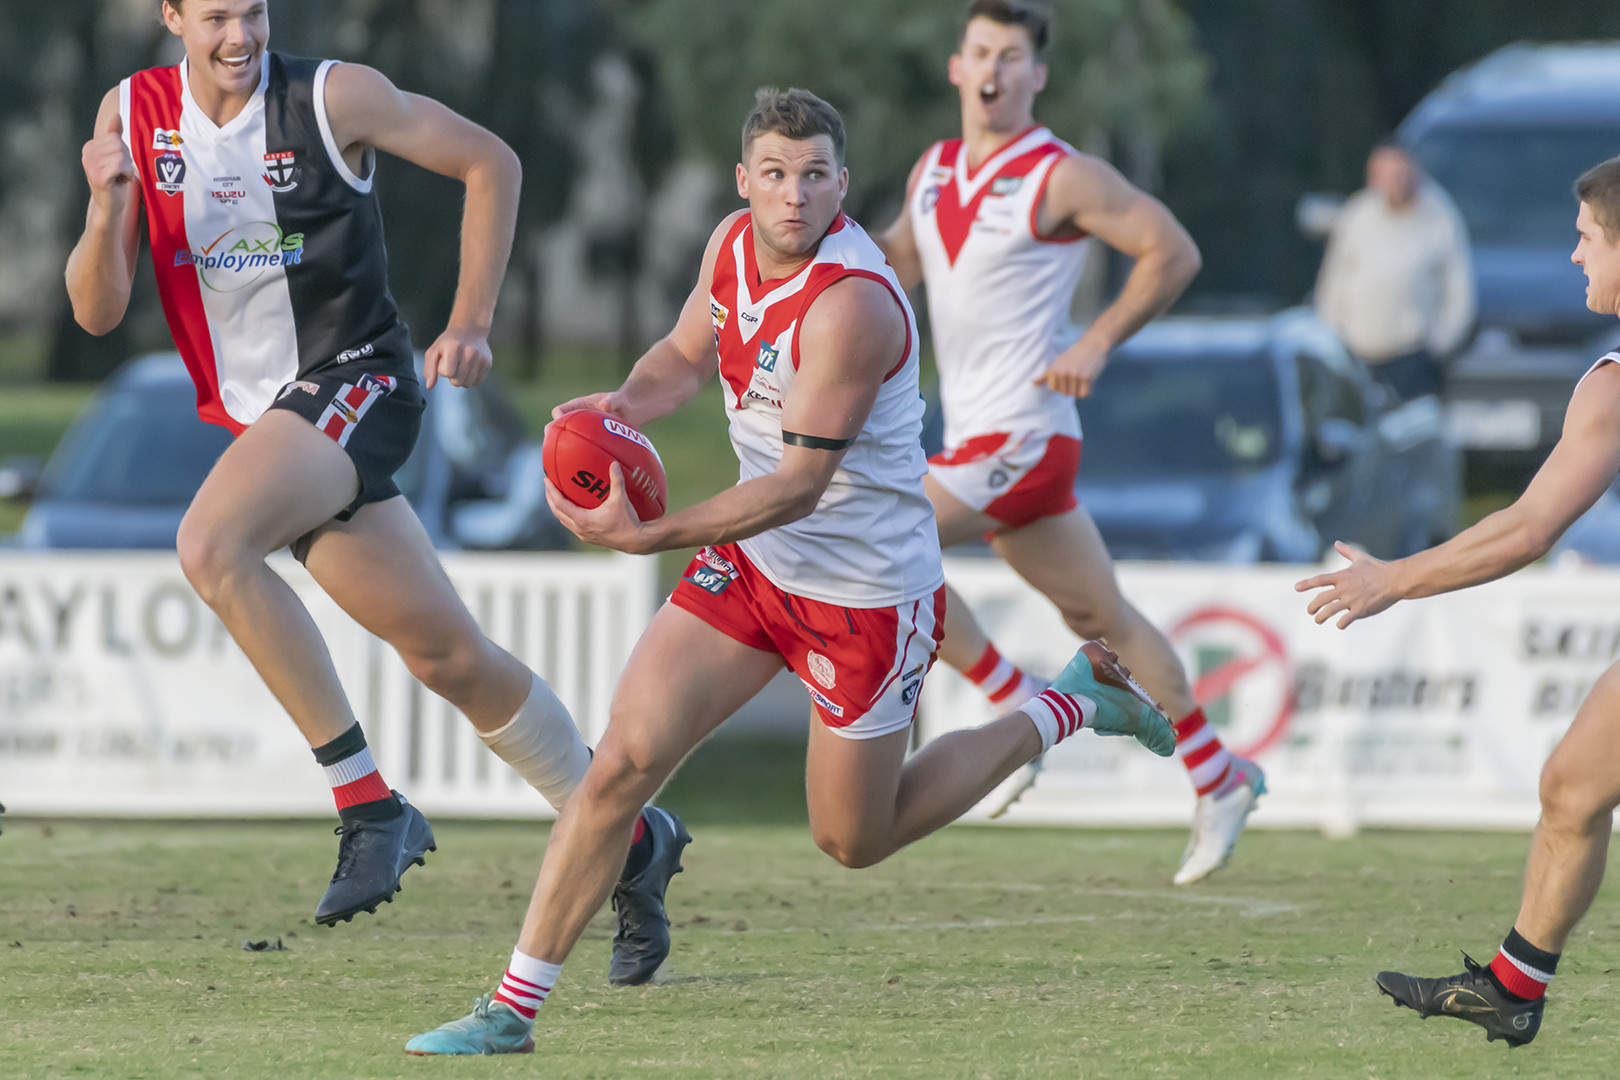 Jack Ganley is one of the key players in the midfield that Stawell need to nullify.